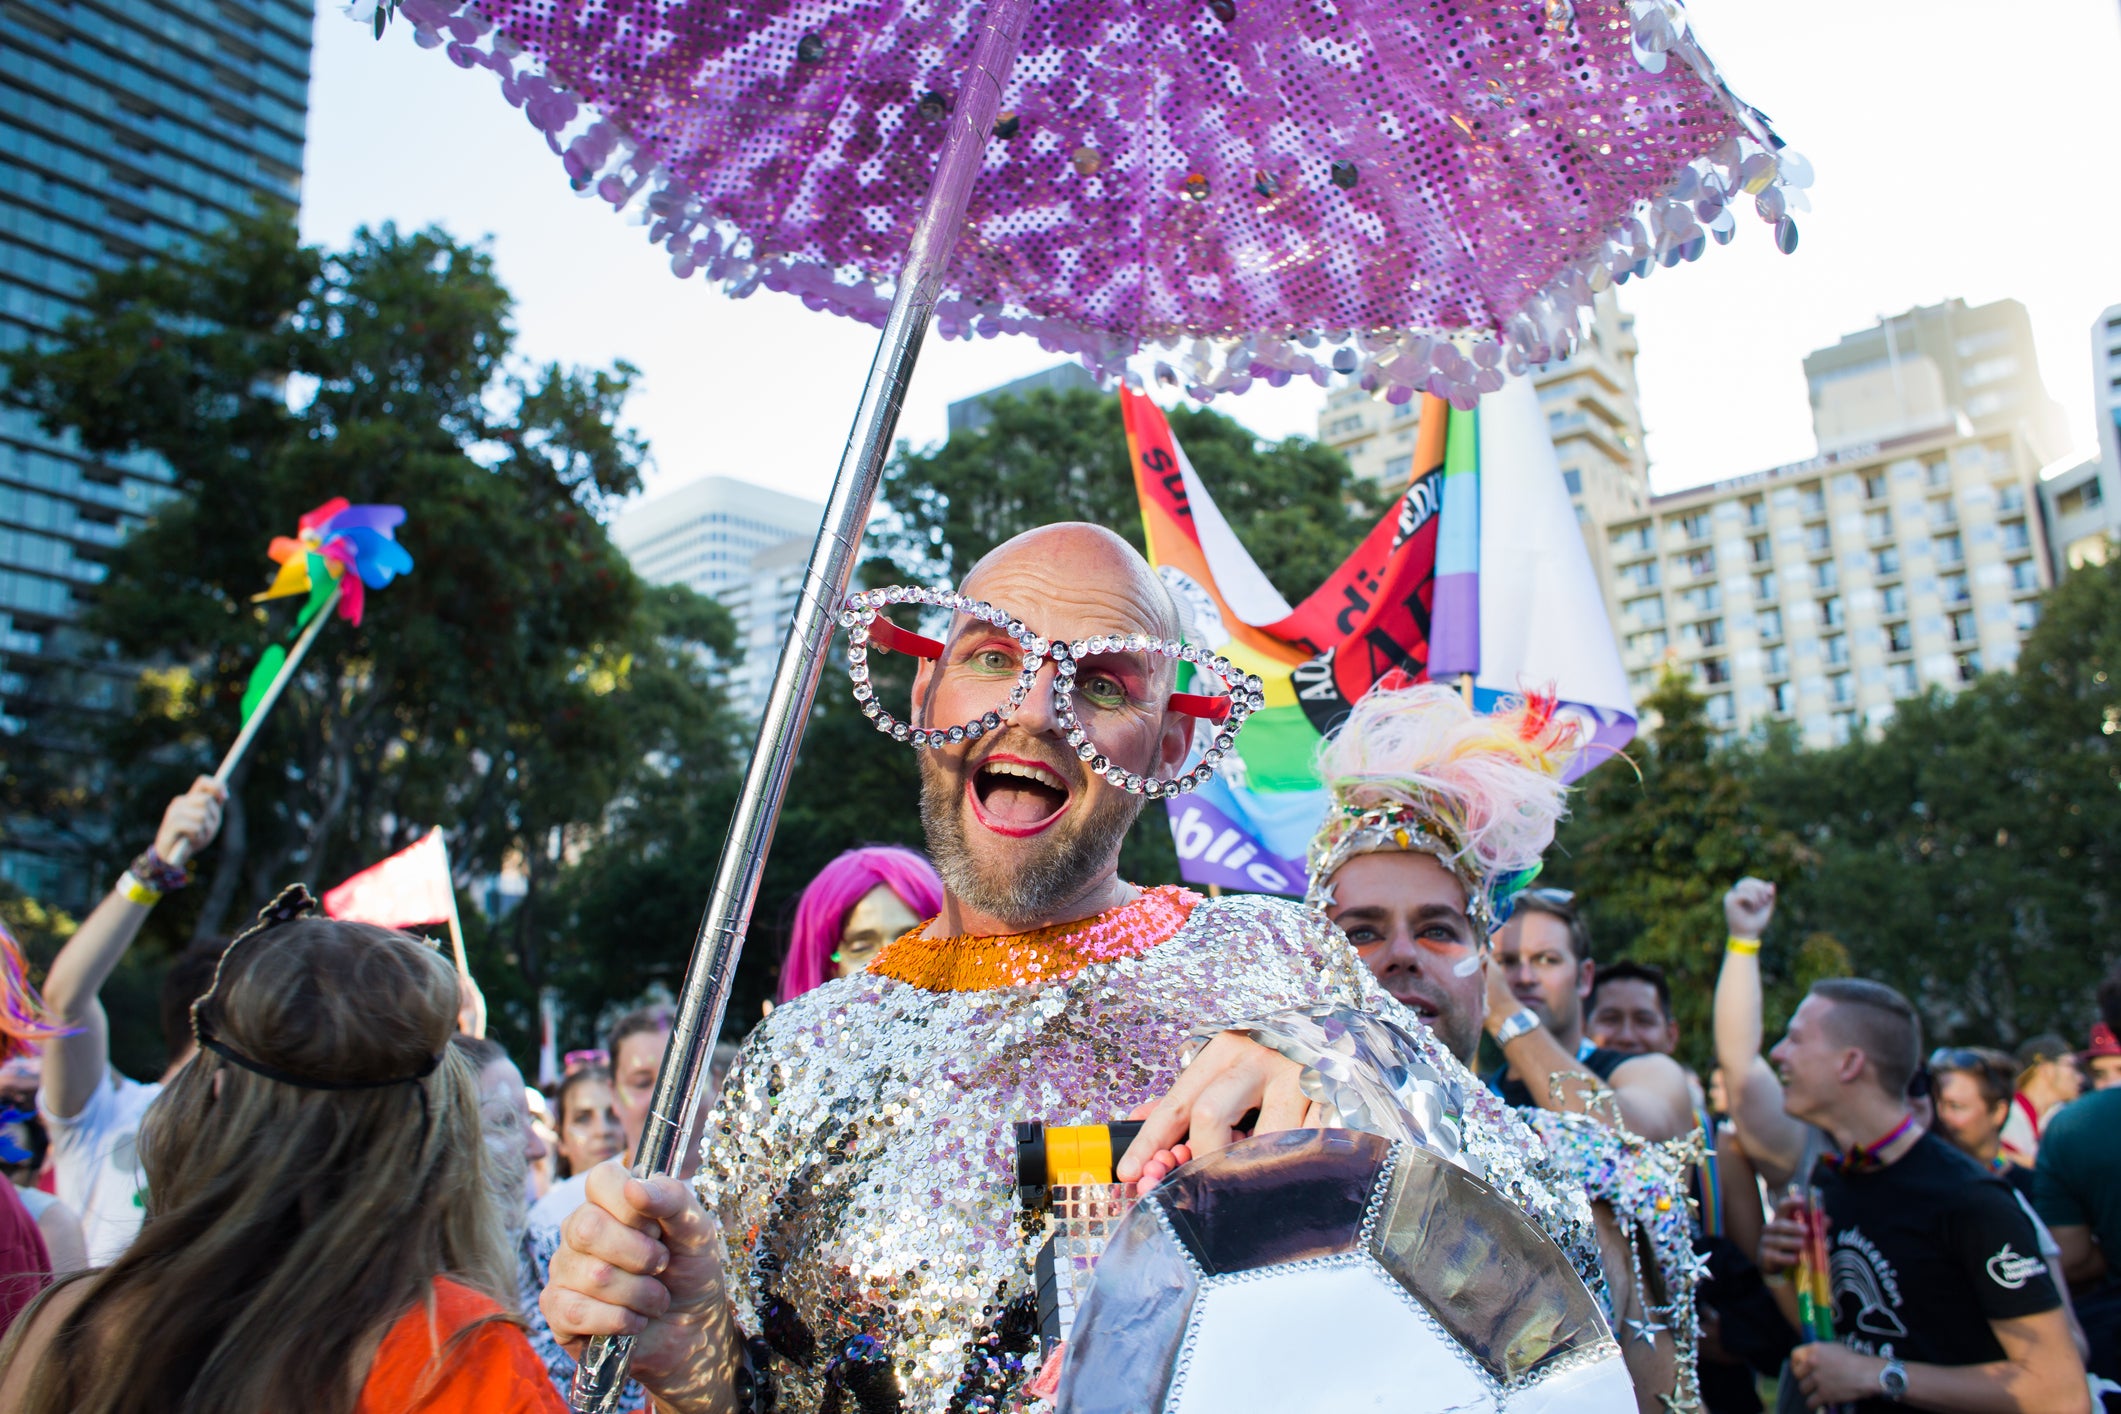 There’s a party atmosphere during Sydney Mardi Gras